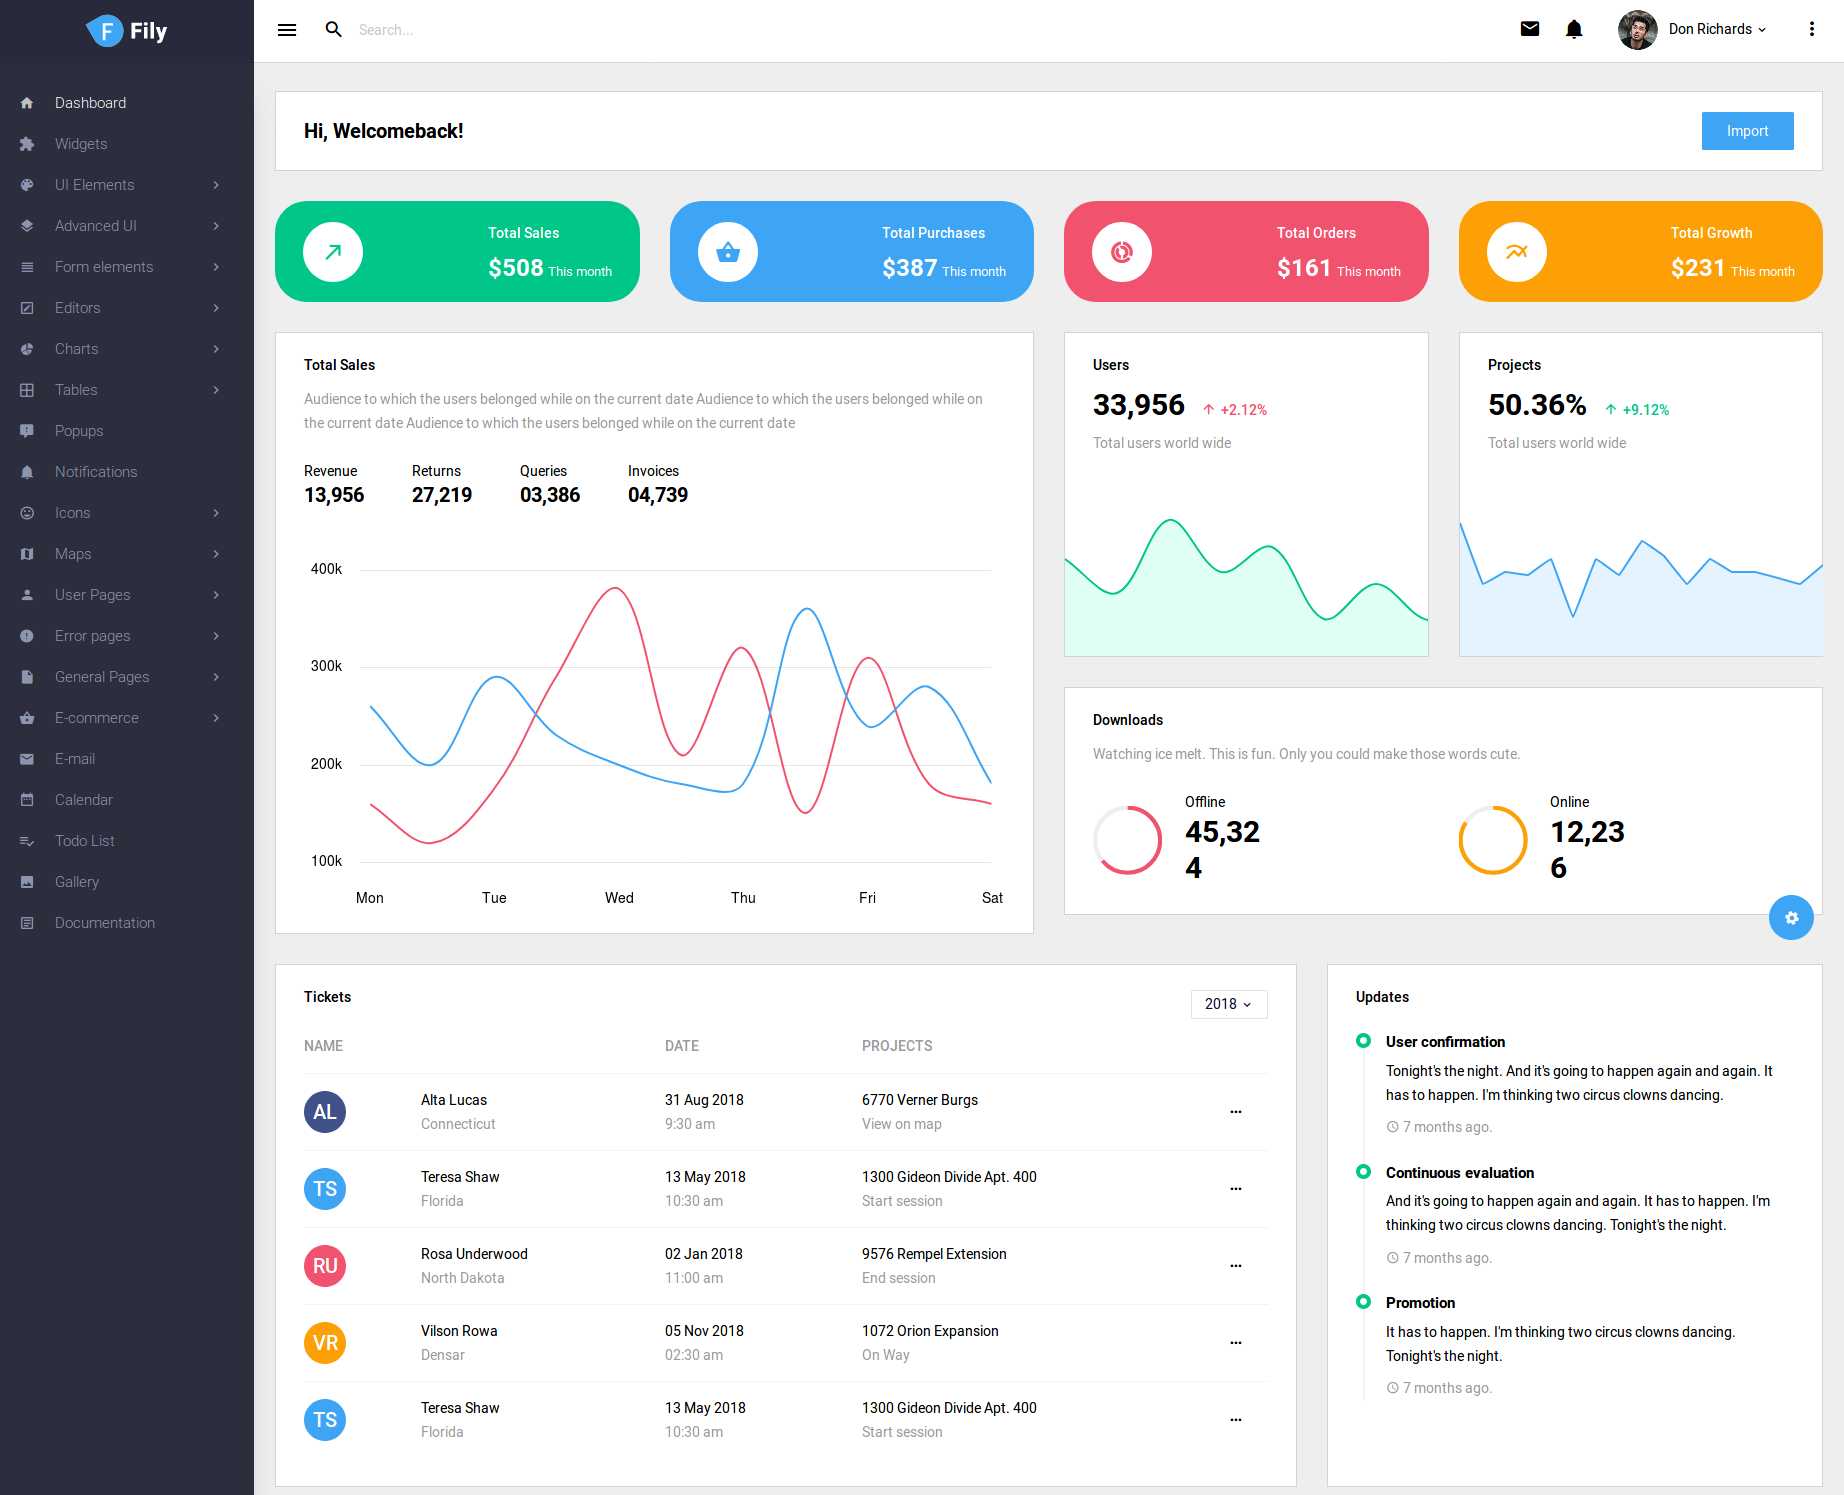 Fily Bootstrap admin template is a user-friendly and highly responsive 